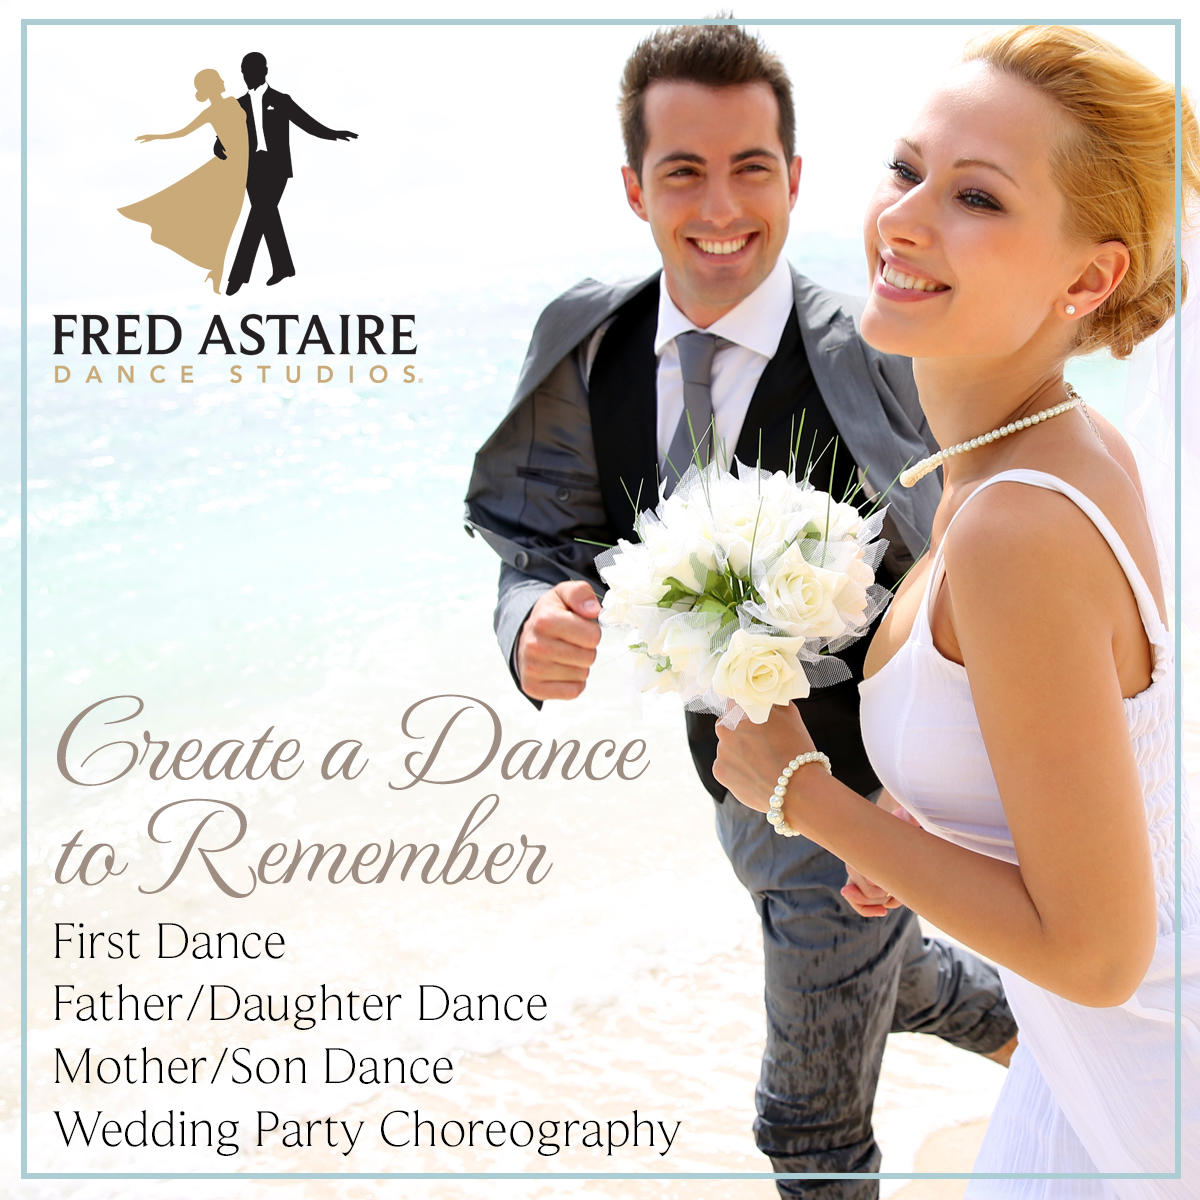 Offering first dance lessons, mother-son dance lessons, father-daughter dance lessons and wedding party choreography! Call today to get started! 401-404-5404